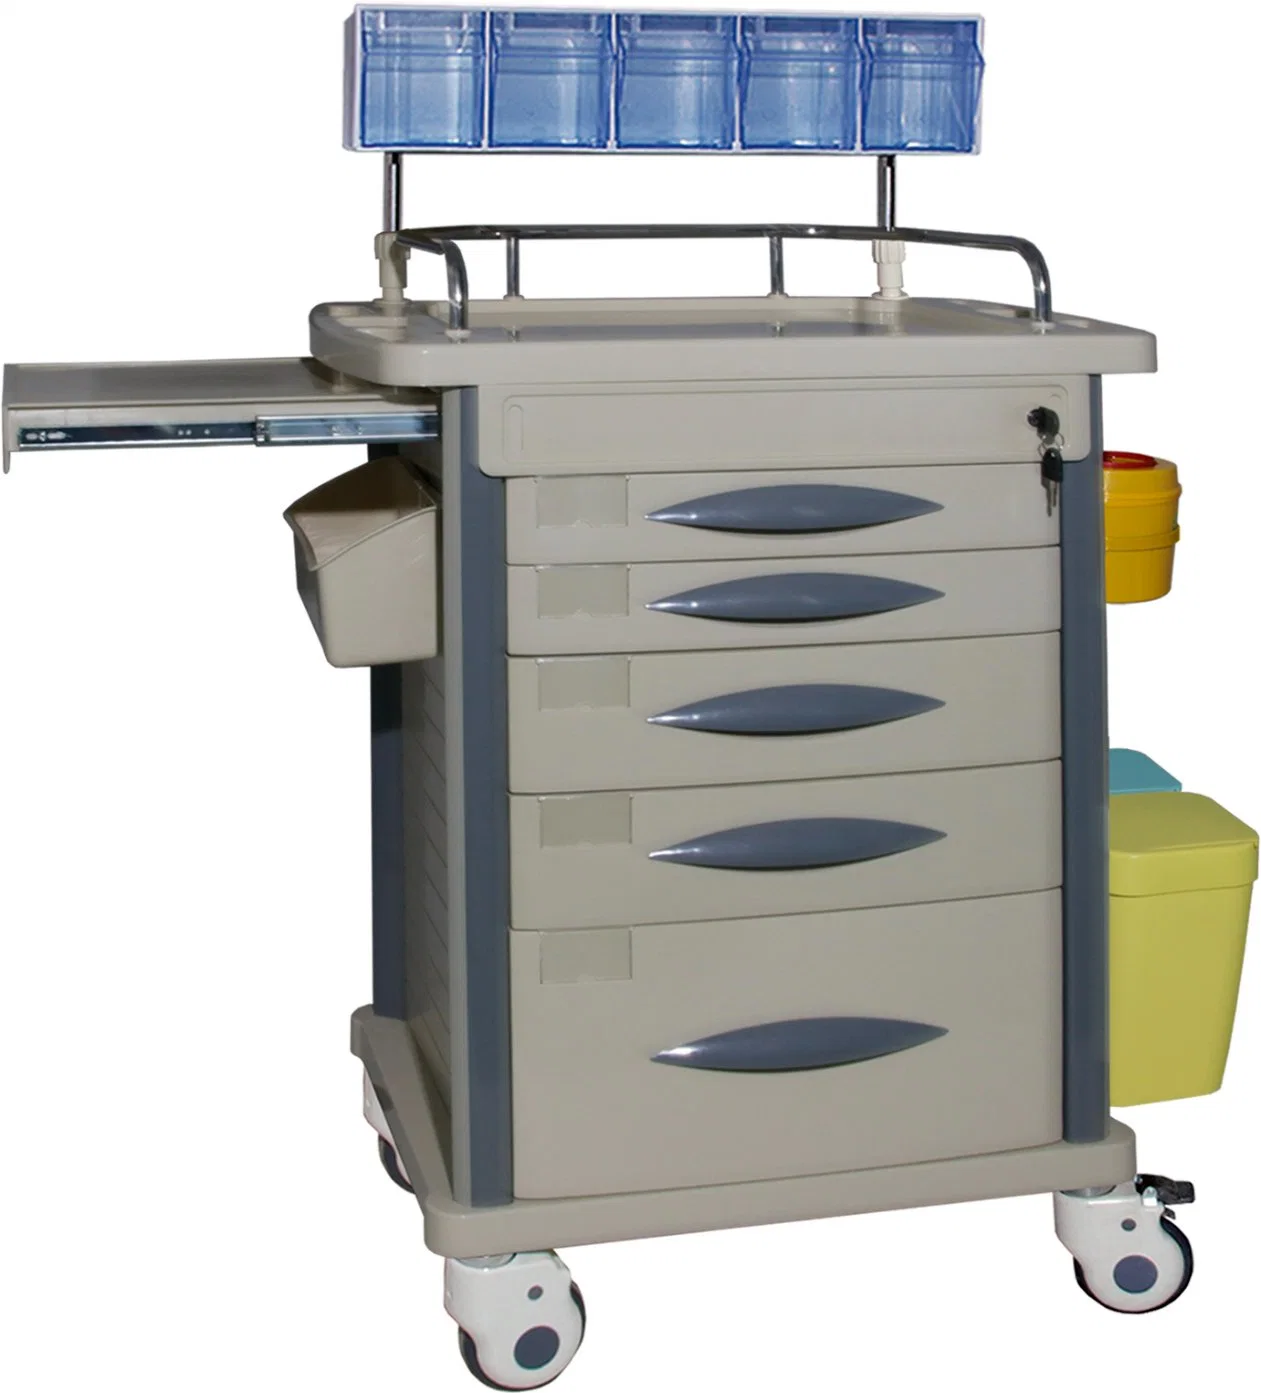 Multifunctional ABS Medical Nurse Anesthesia Trolley Cart with Wheels Hospital Furniture